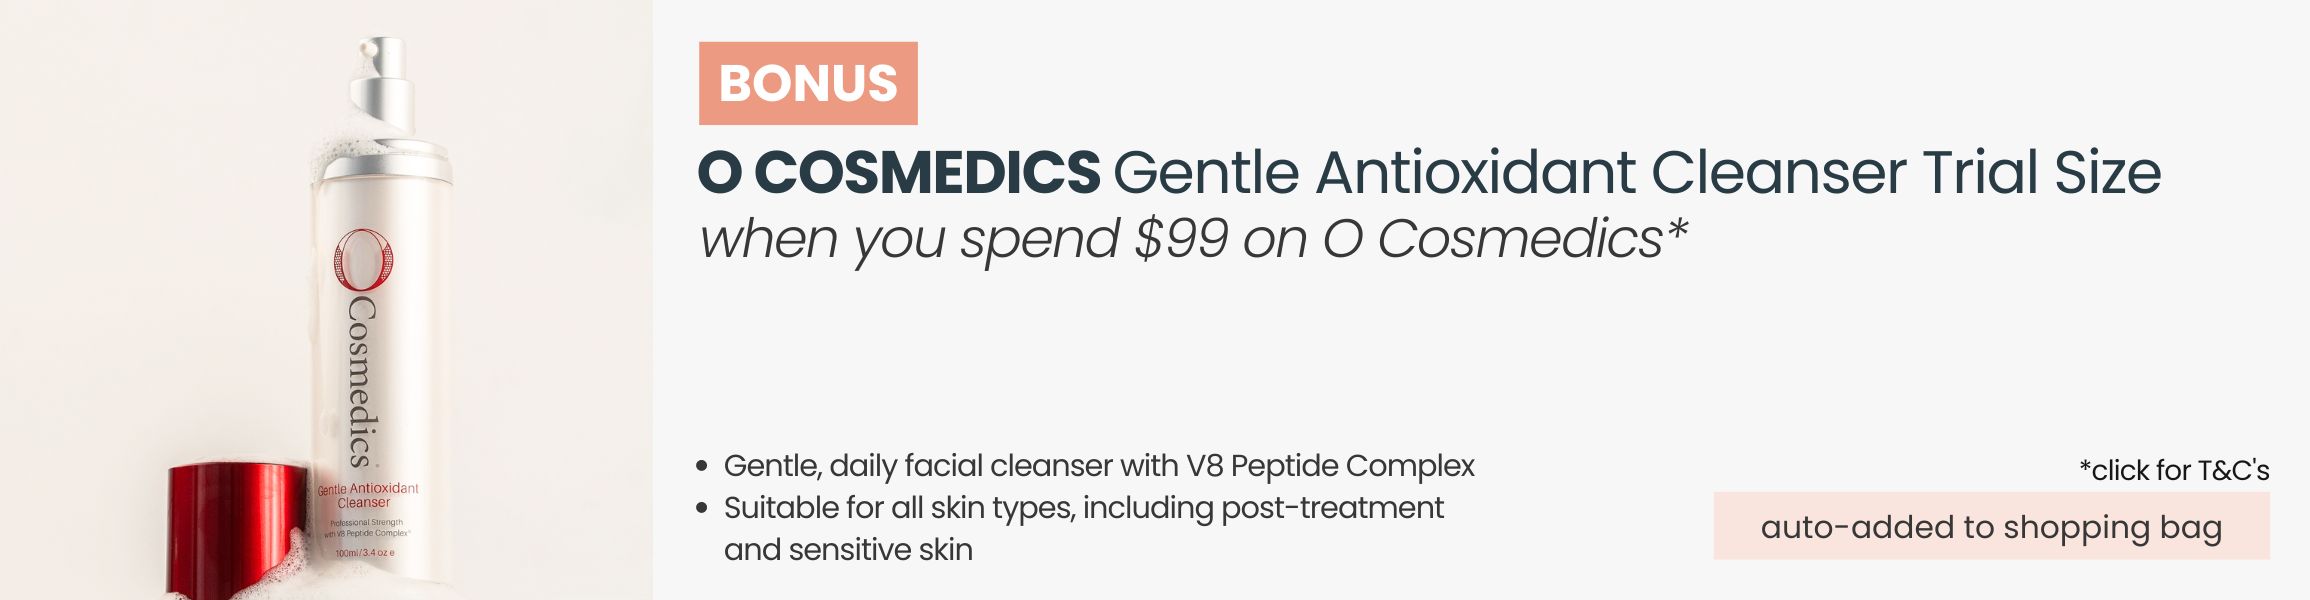 BONUS O Cosmedics Gentle Antioxidant Cleanser 15ml Trial Size. Automatically added to your shopping bag when you spend $99 on O Cosmedics products.